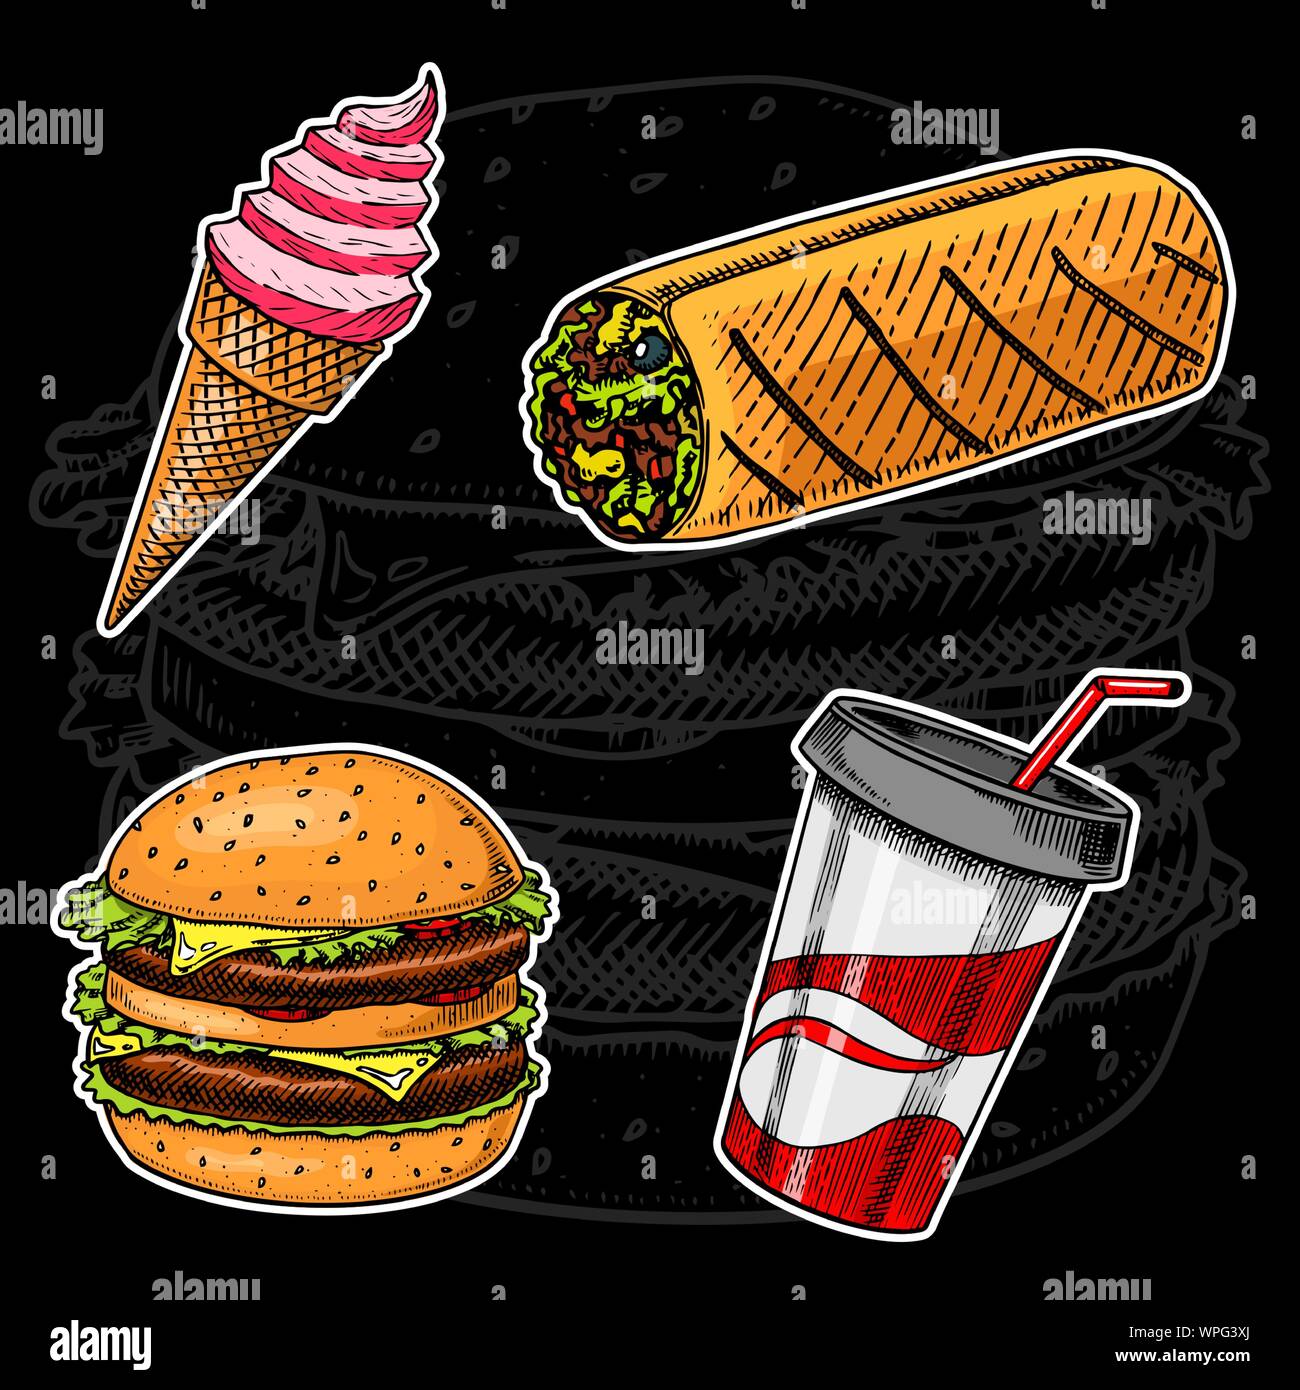 Junk Fast food, Sandwich and Ice Cream, Burger and Soft Drink on a black background. Vintage Sketch for restaurant menu. Hand drawn stickers in retro Stock Vector